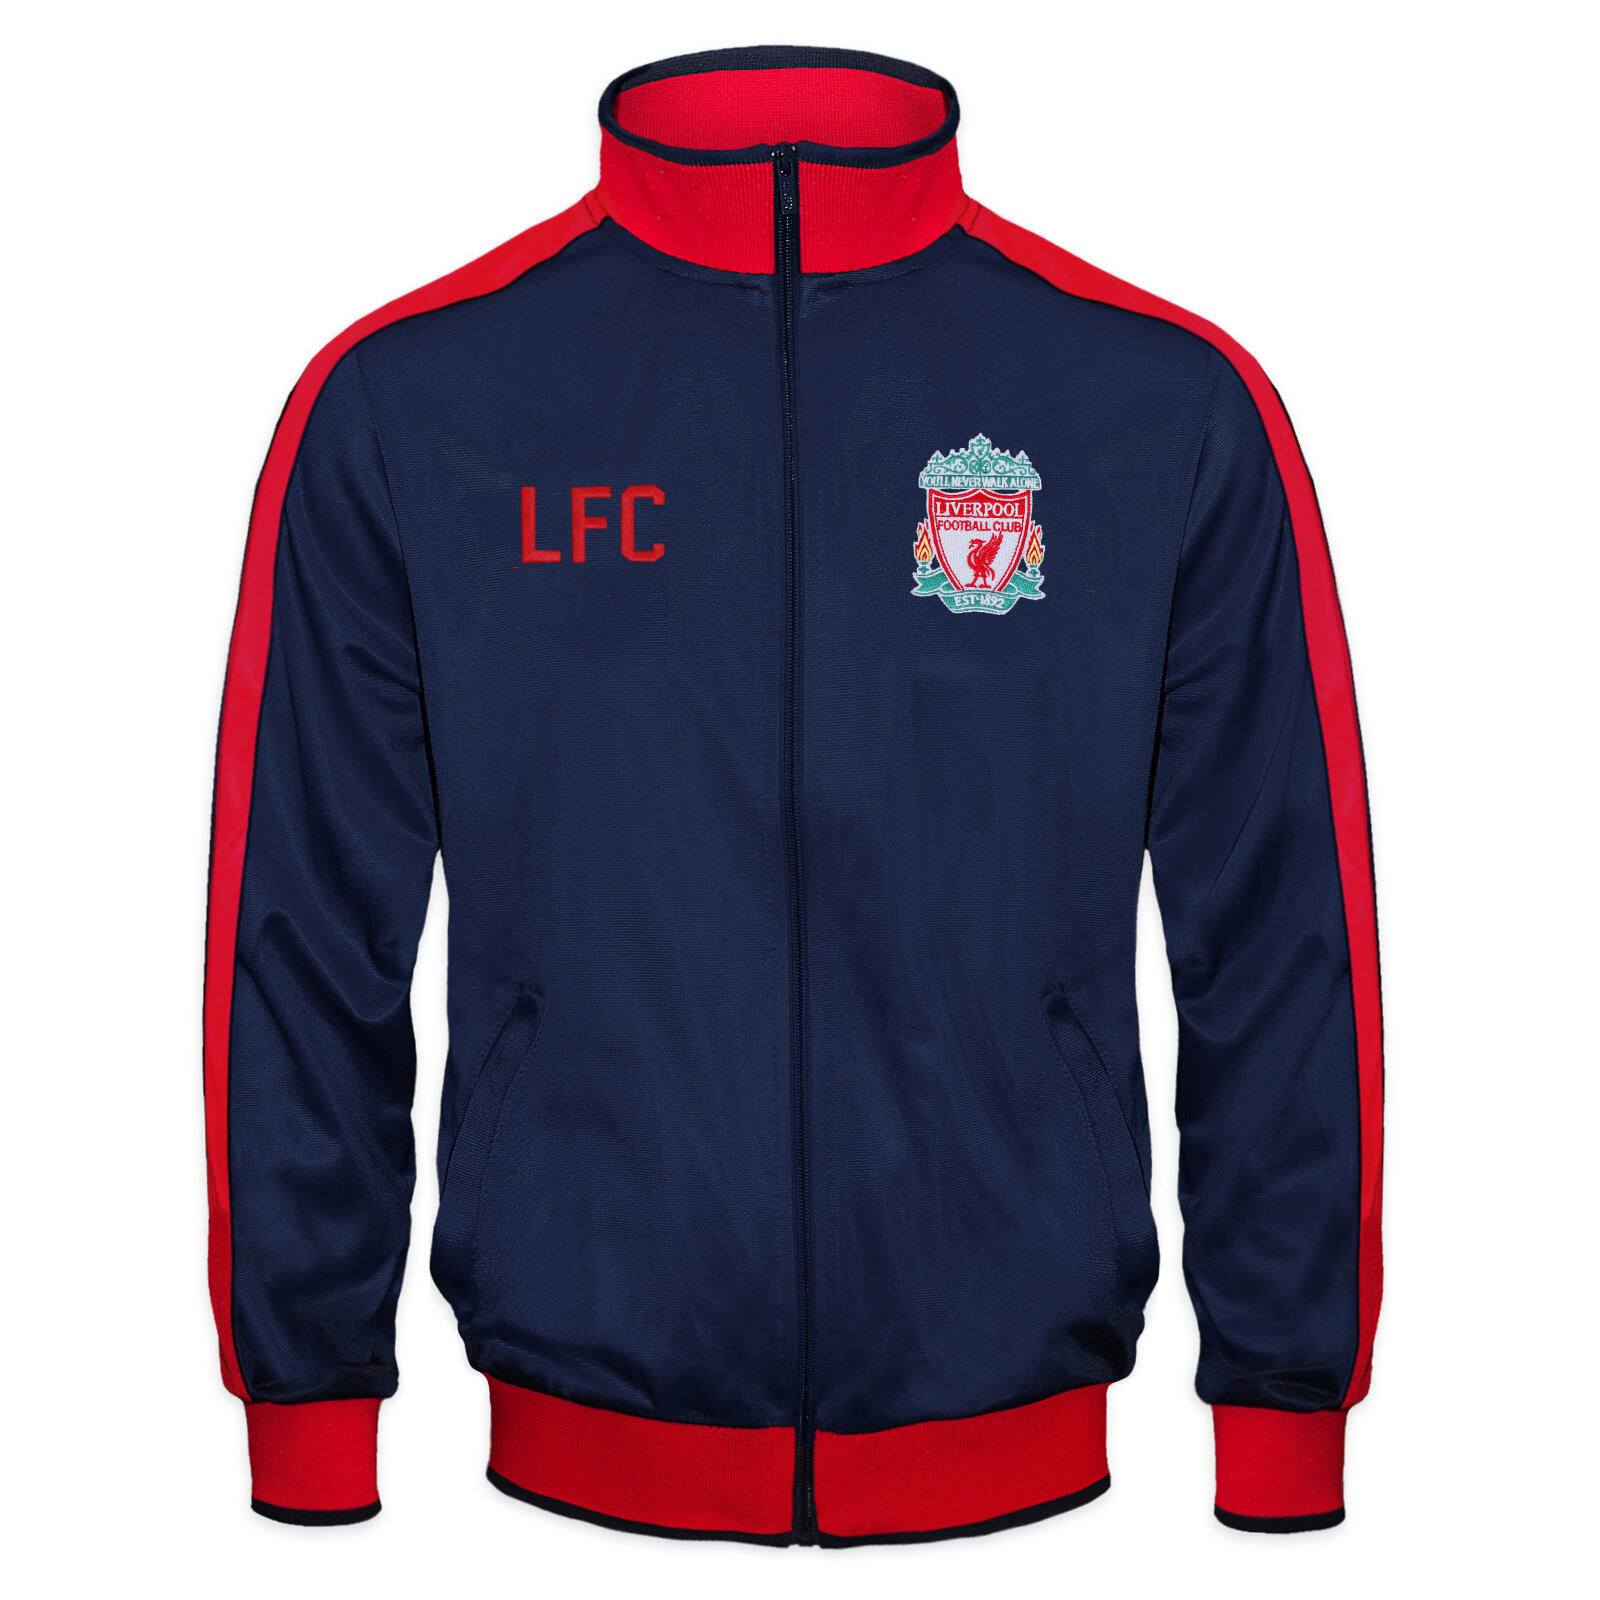 LIVERPOOL FC Liverpool FC Boys Jacket Track Top Retro Kids OFFICIAL Football Gift